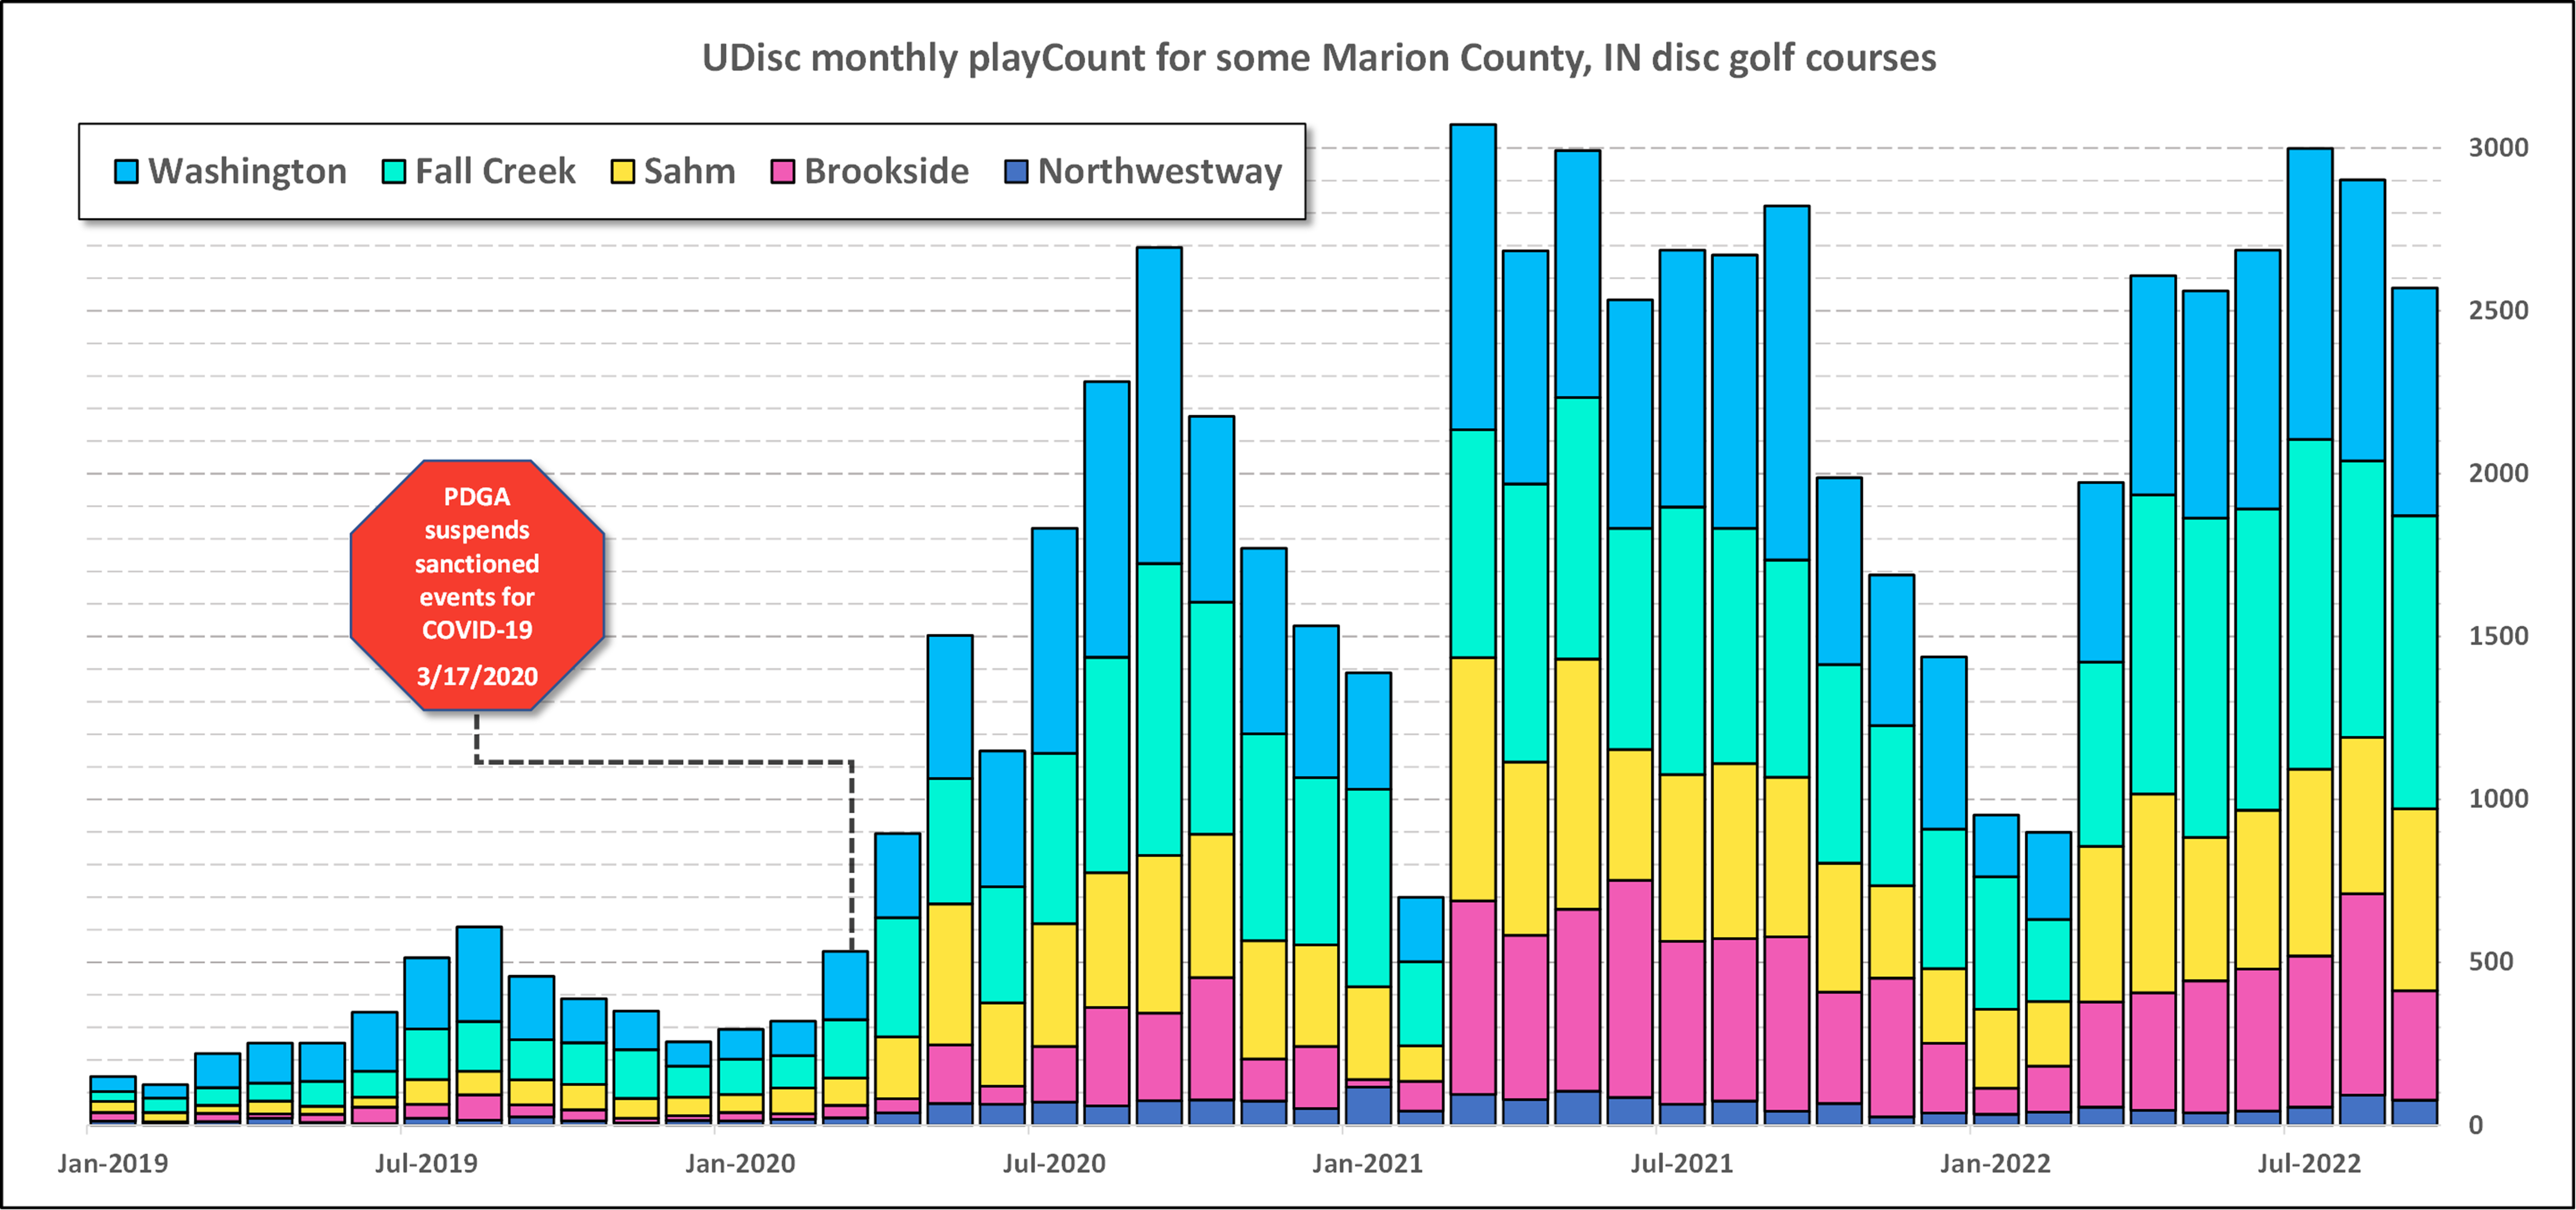 UDiscplay-Count-Time-Series-Summary-Graphic.png